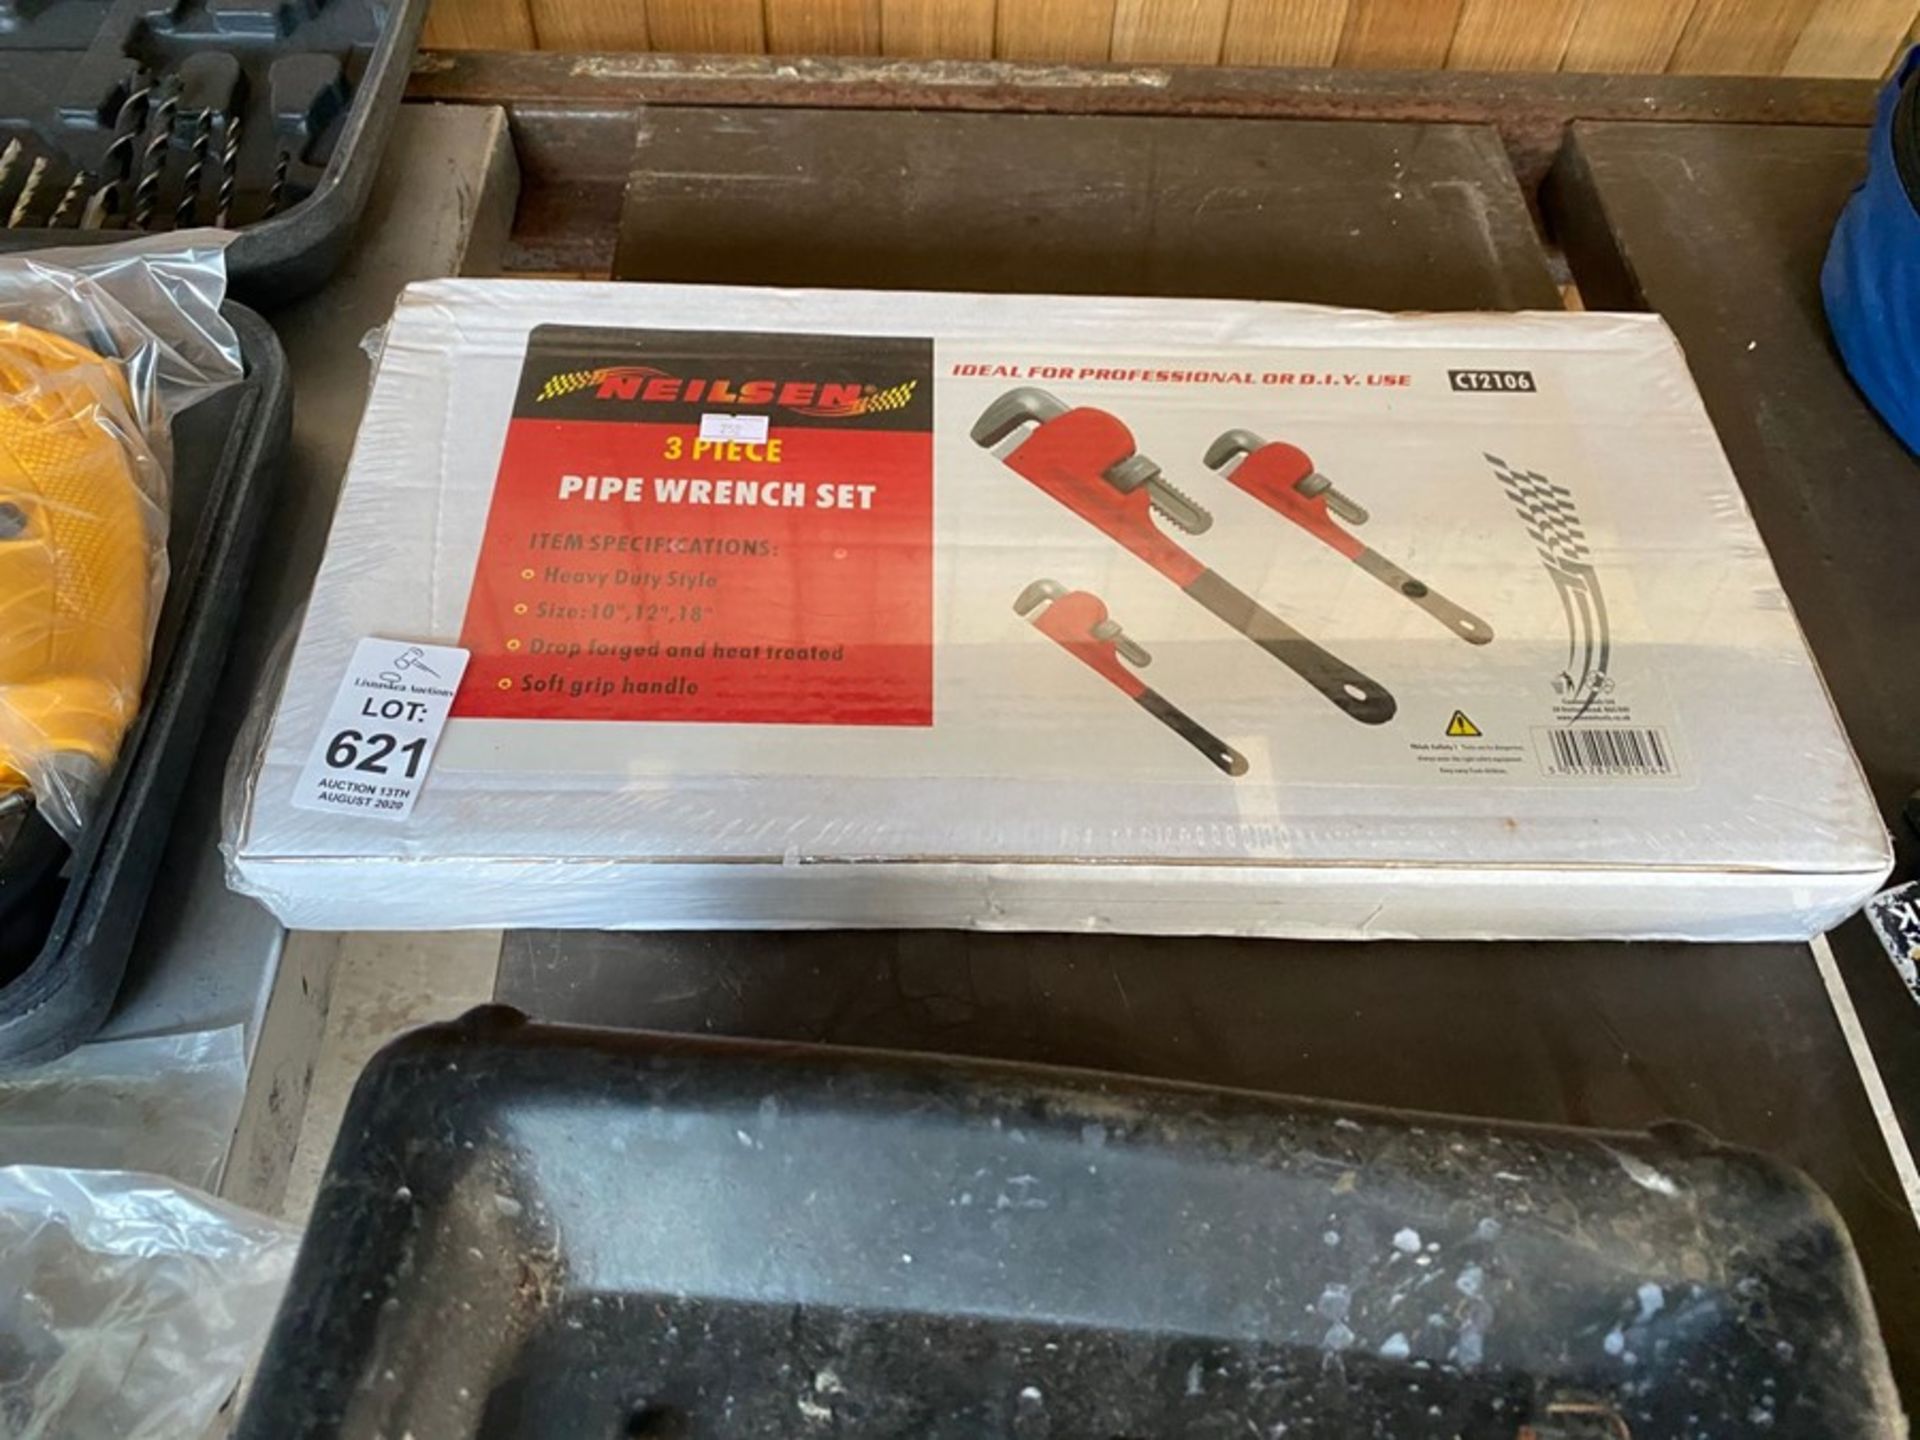 NEW NEILSON 3 PIECE PIPE WRENCH SET